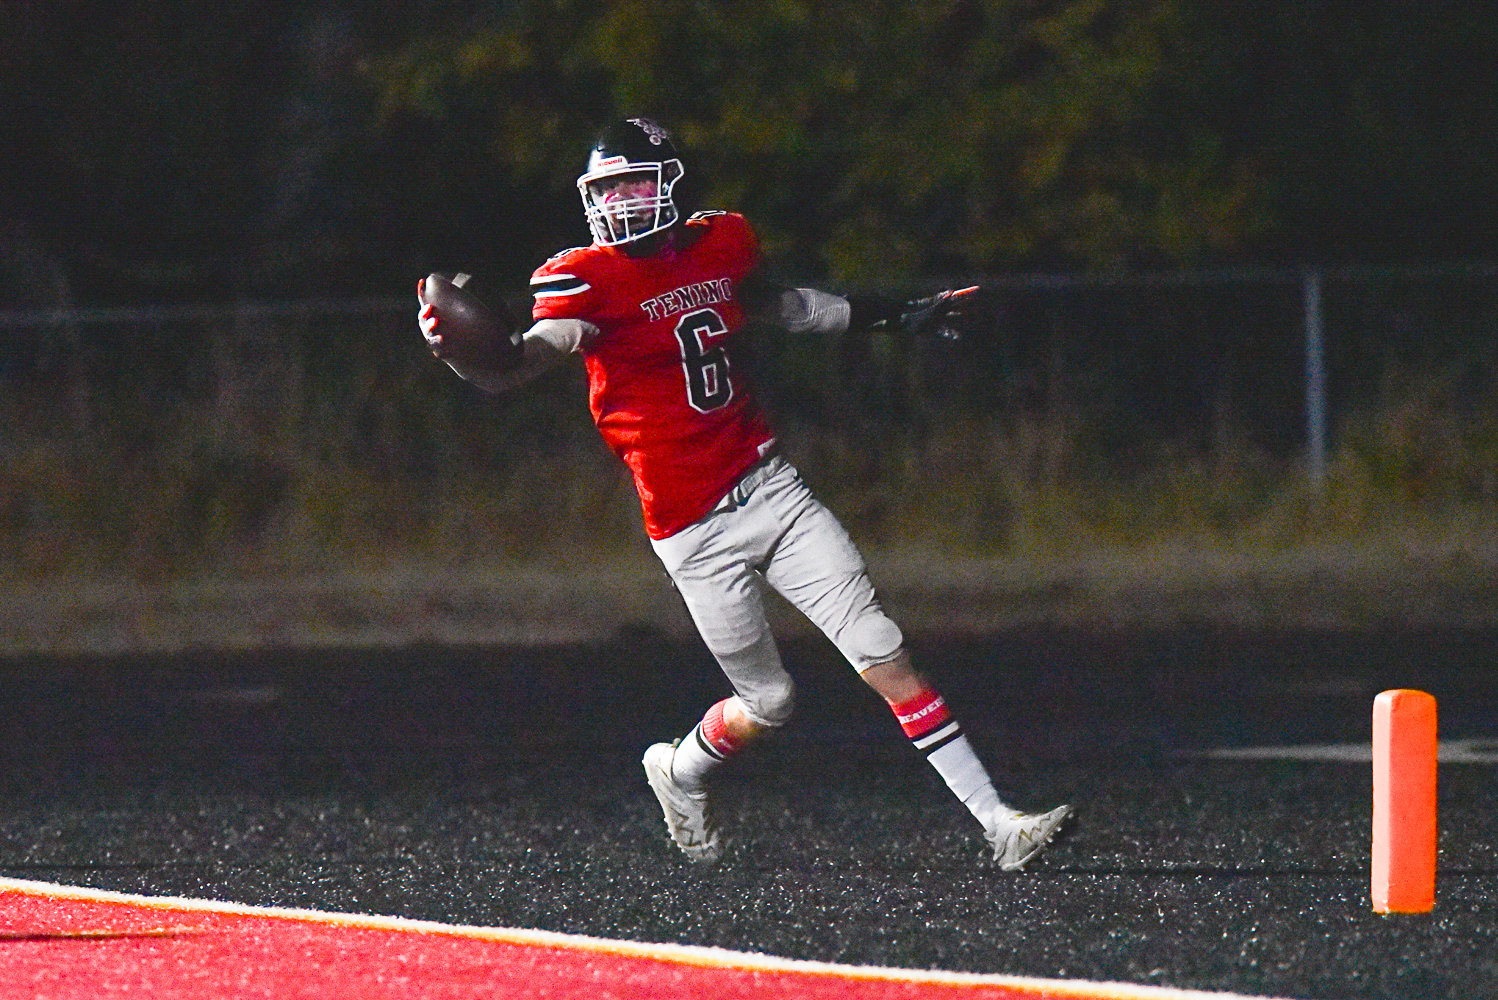 Max Craig celebrates after scoring a touchdown in the third quarter of Tenino's 66-26 win over Elma on Oct. 14.